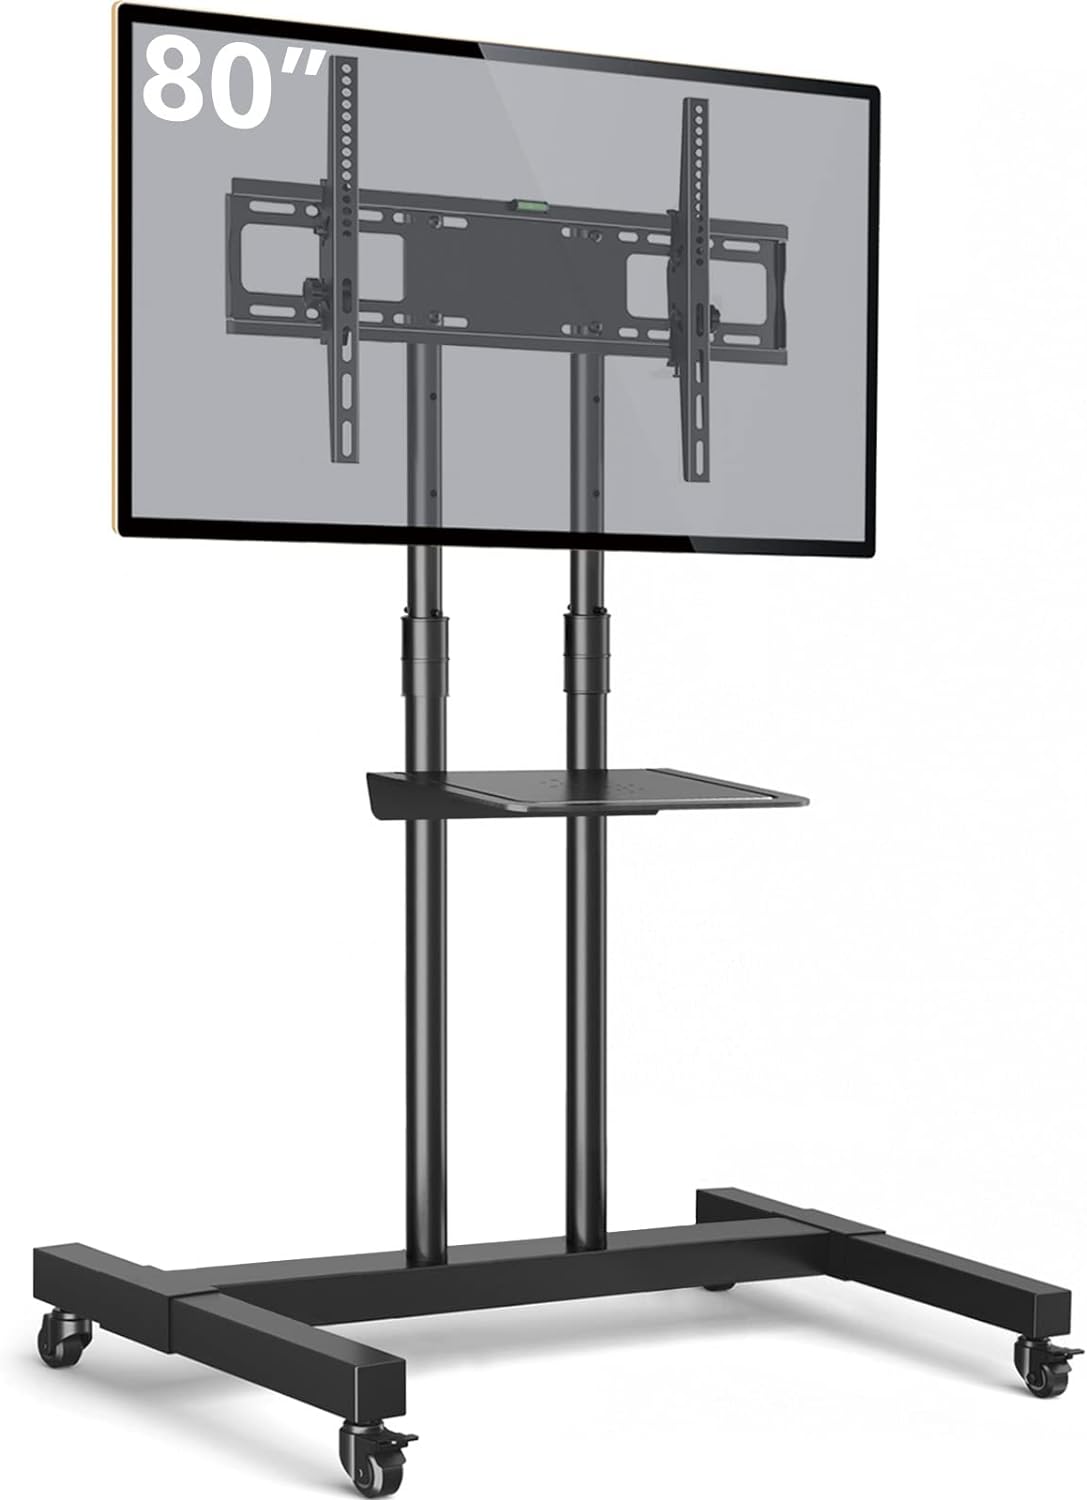 TAVR Furniture Mobile TV Stand Rolling TV Cart Floor Stand with Mount on Lockable Wheels Height Adjustable for 32-80 Inch TV Stand Flat Screen or Curved TVs Monitors Display Trolley Loading 110 lbs